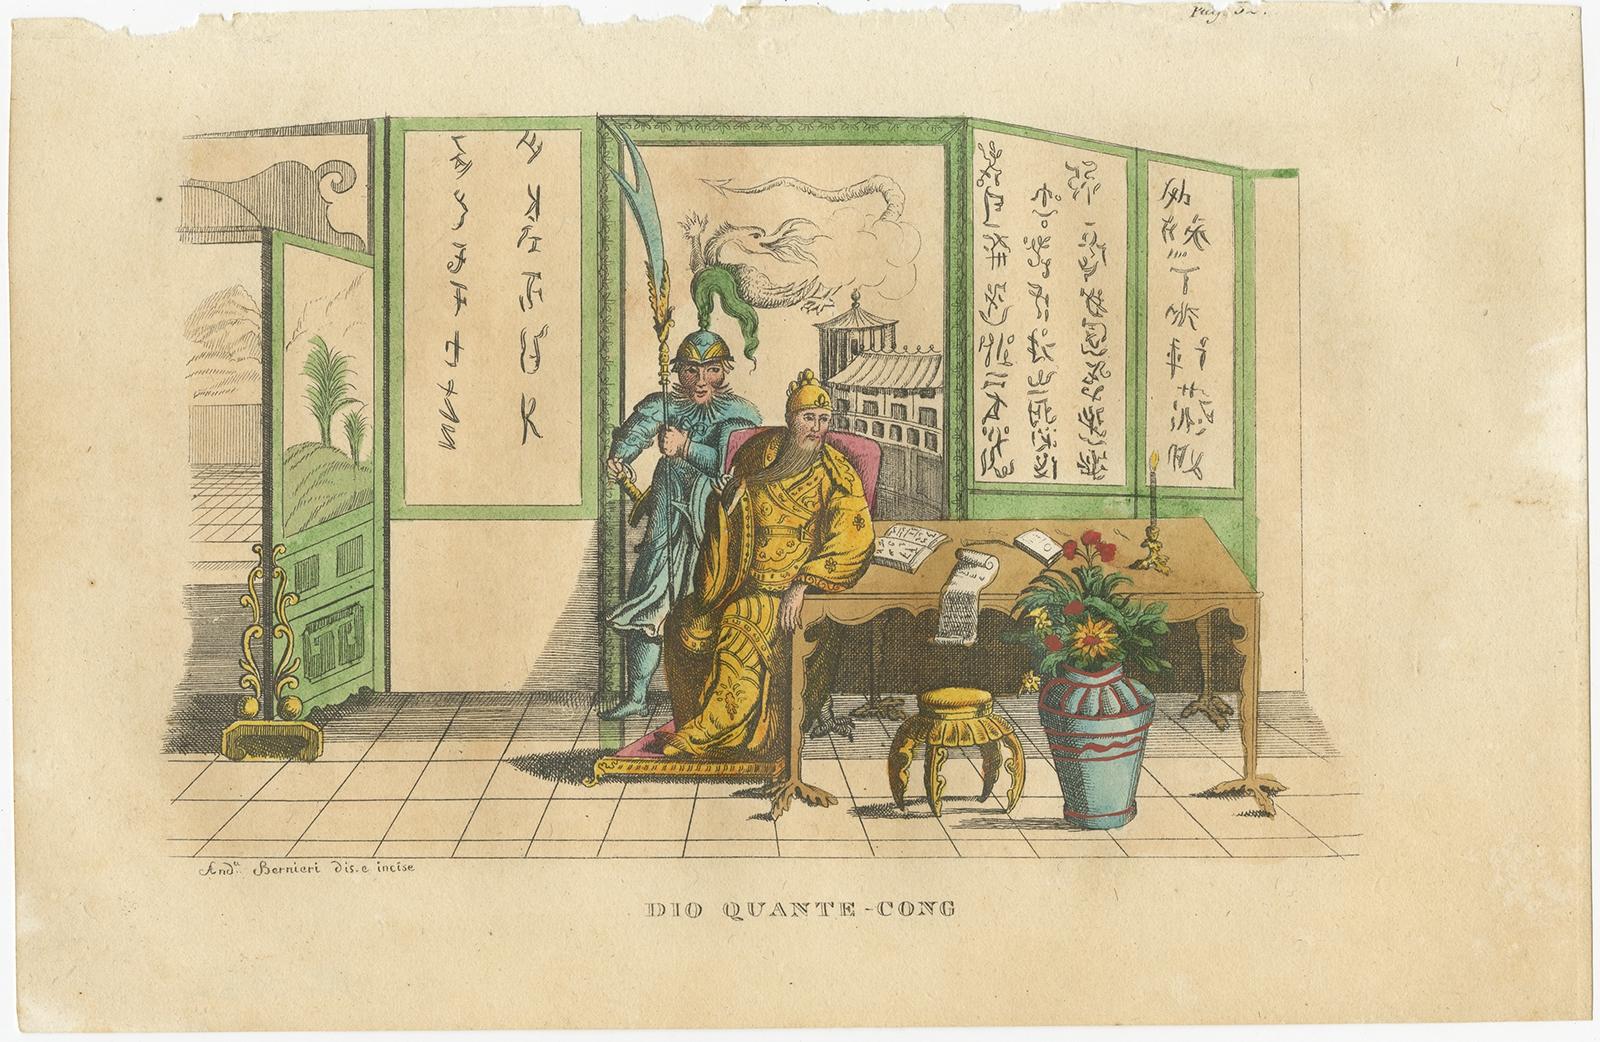 Antique print titled 'Dio Quante-Cong'. 

Lithograph of the deity Quante-Cong (or Shangdi), first ruler of China. This print originates from 'Ancient and Modern Costumes of all the Peoples of the World' by G. Ferrario.

Artists and Engravers: